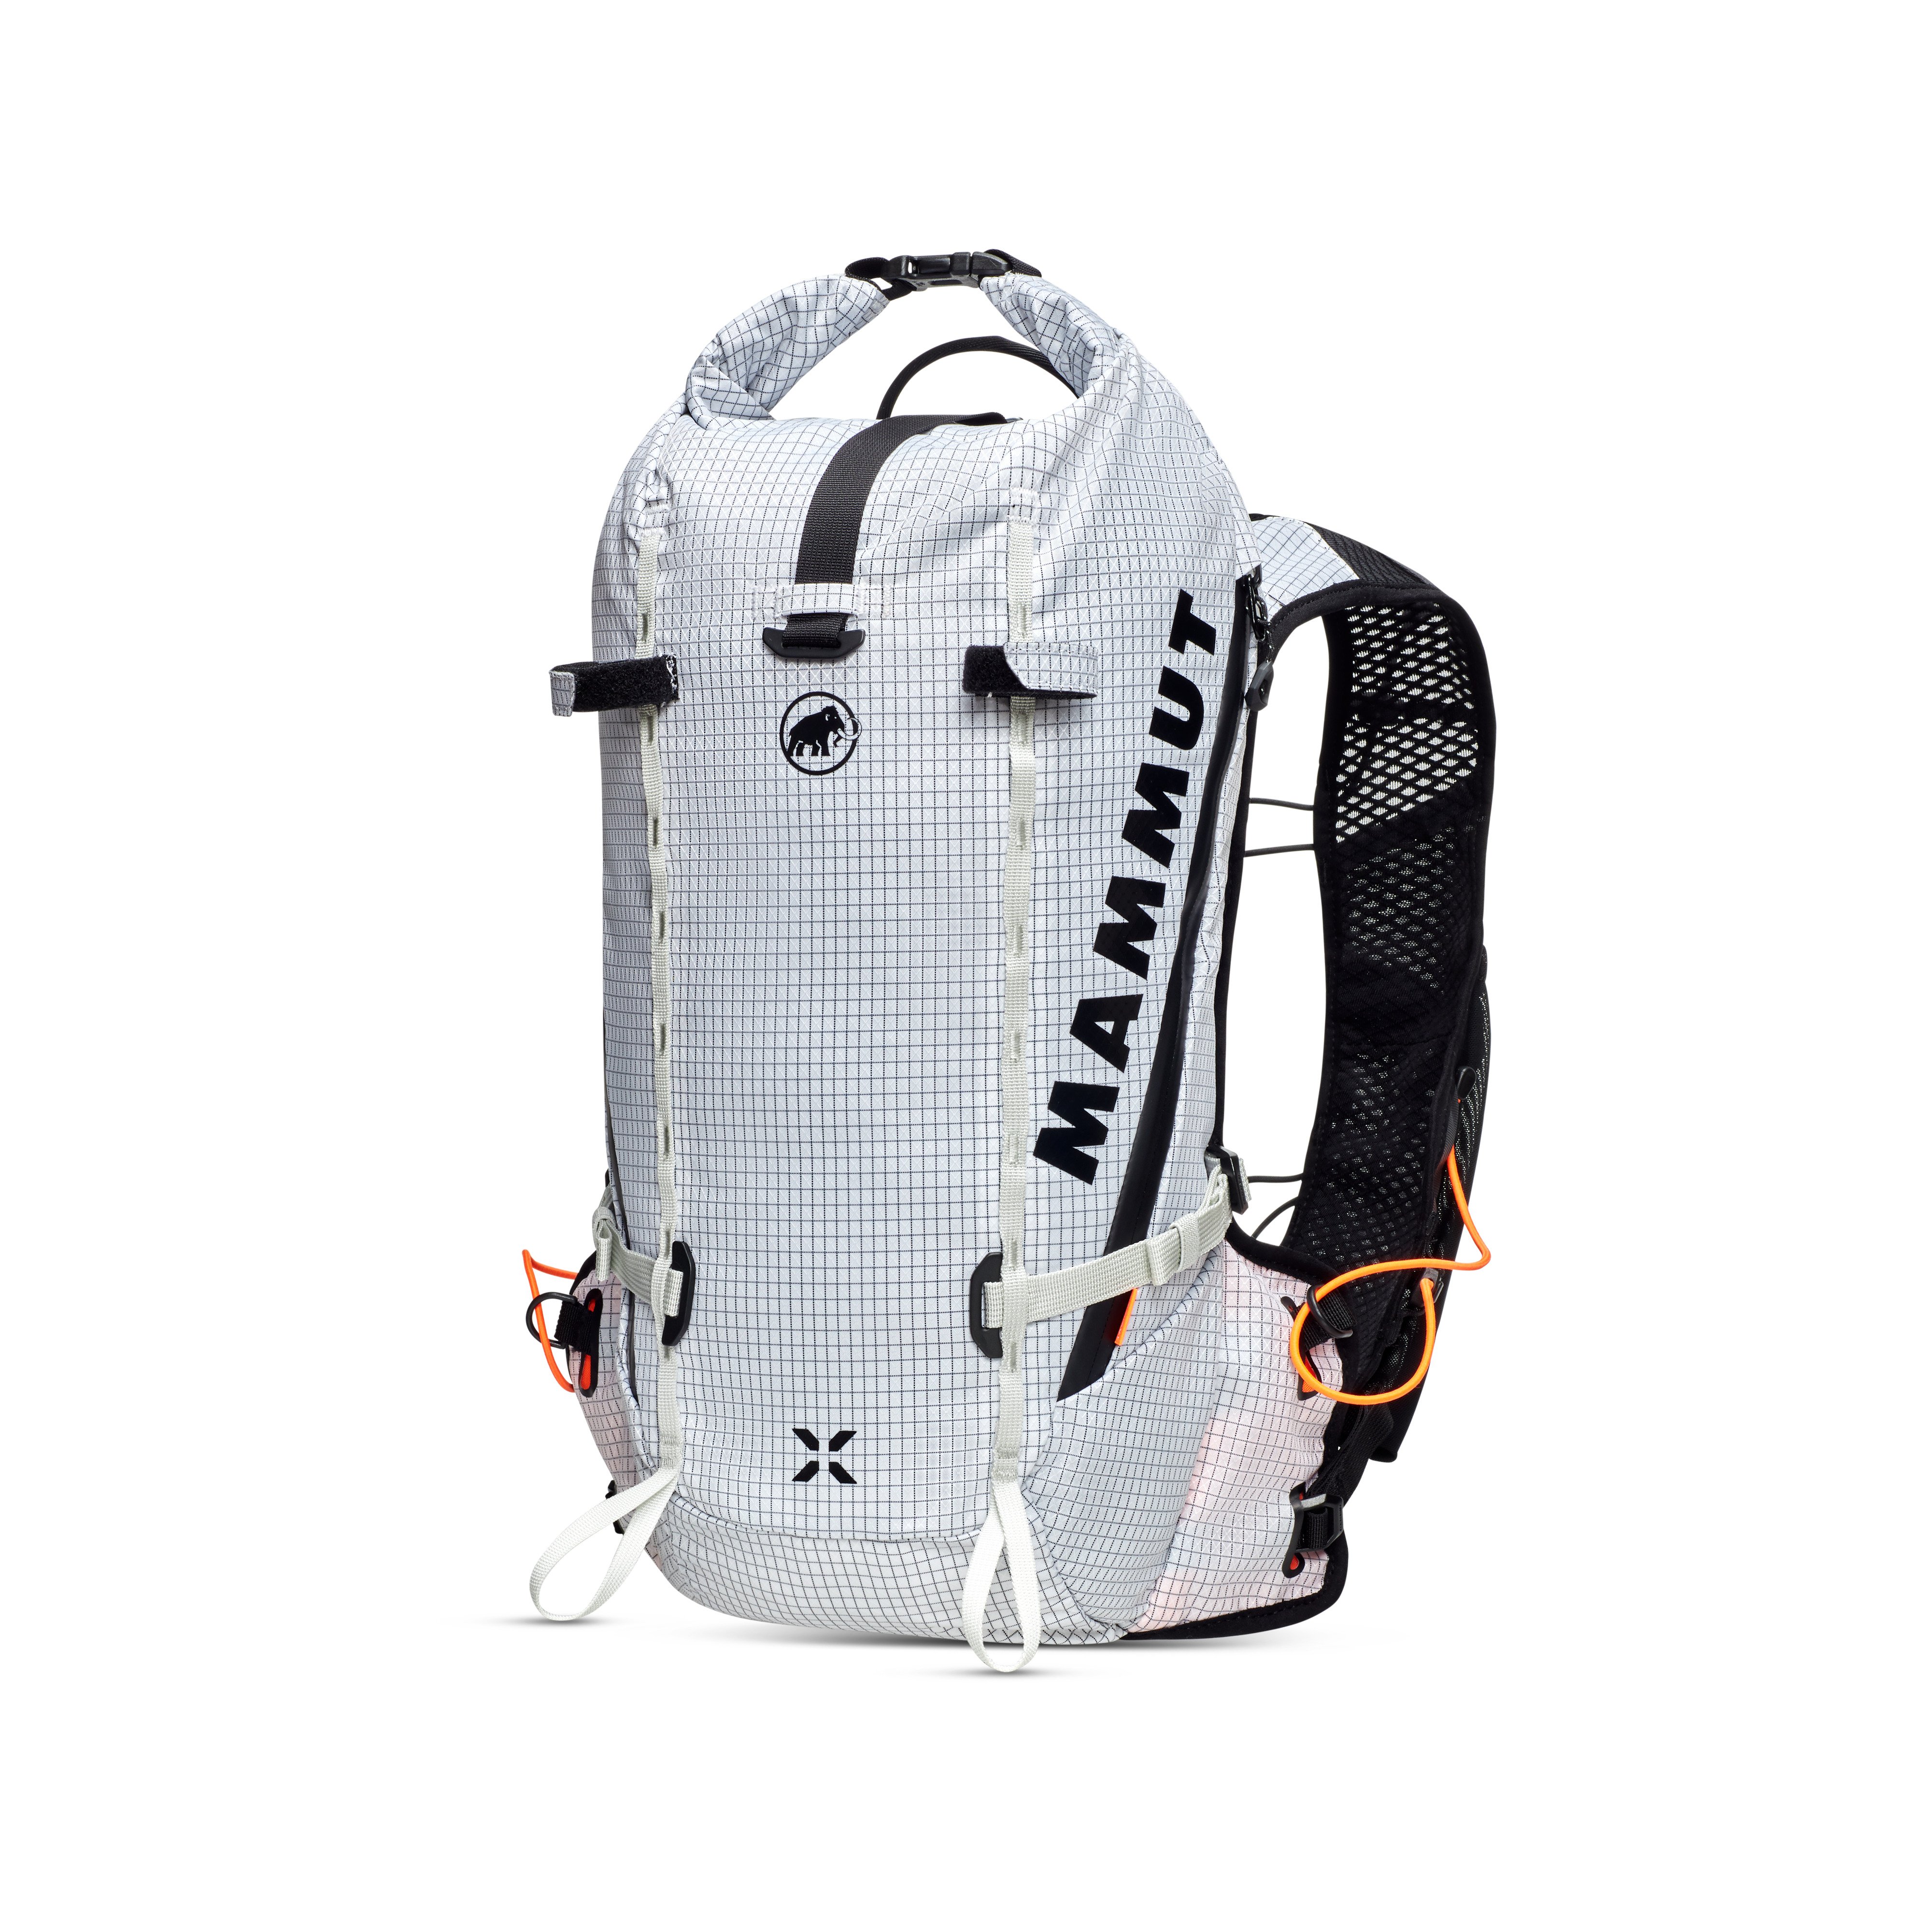 Trion 15 - white, 15 L product image